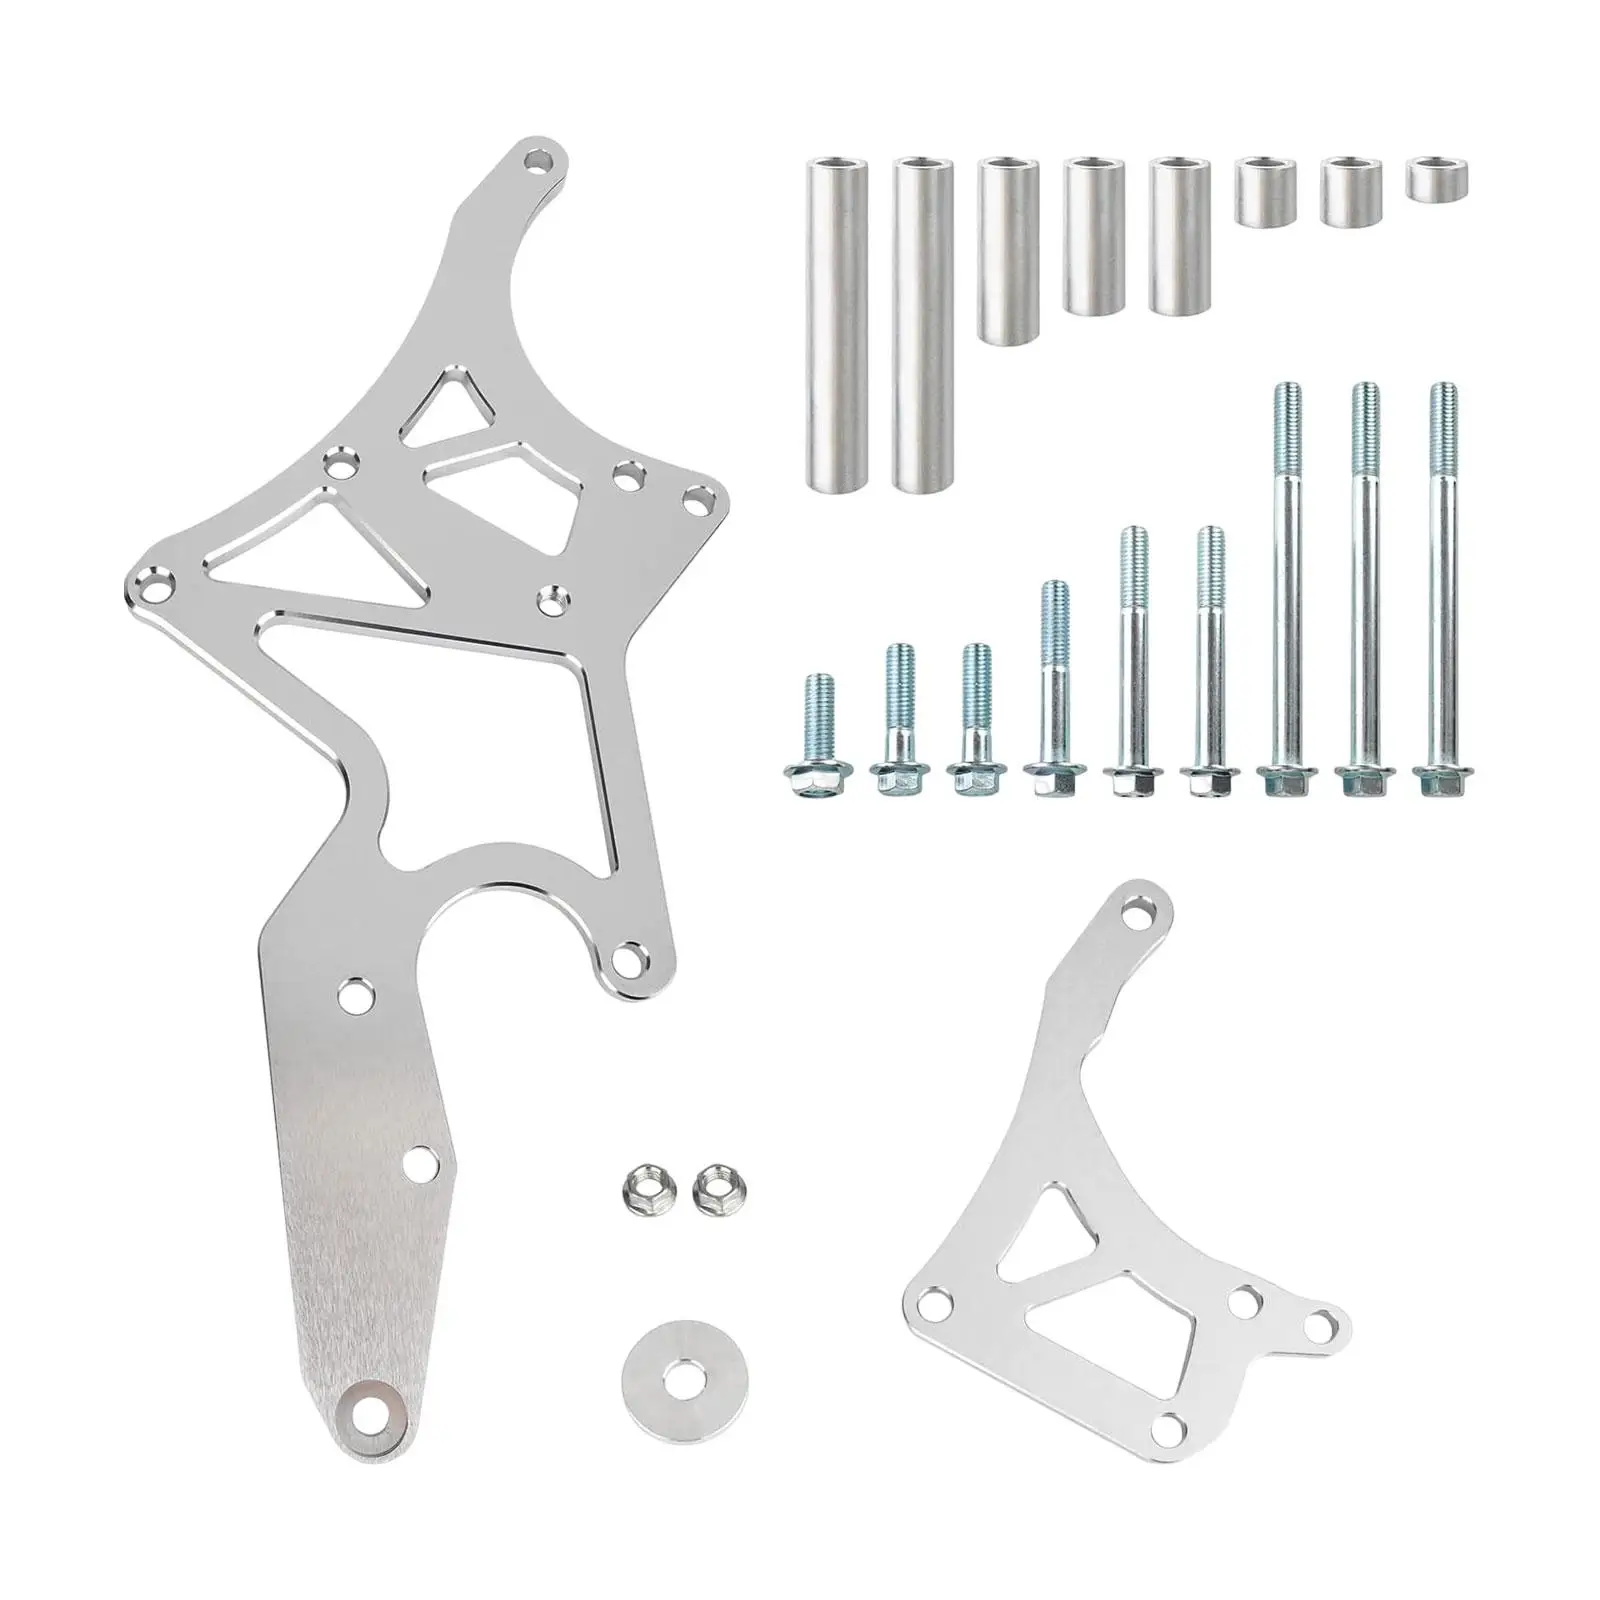 LS Engine Serpentine Bracket Easy Installation Spare Parts Durable Replace for Chevrolet 4.8L 5.3L 6.0L 6.2L Truck SUV